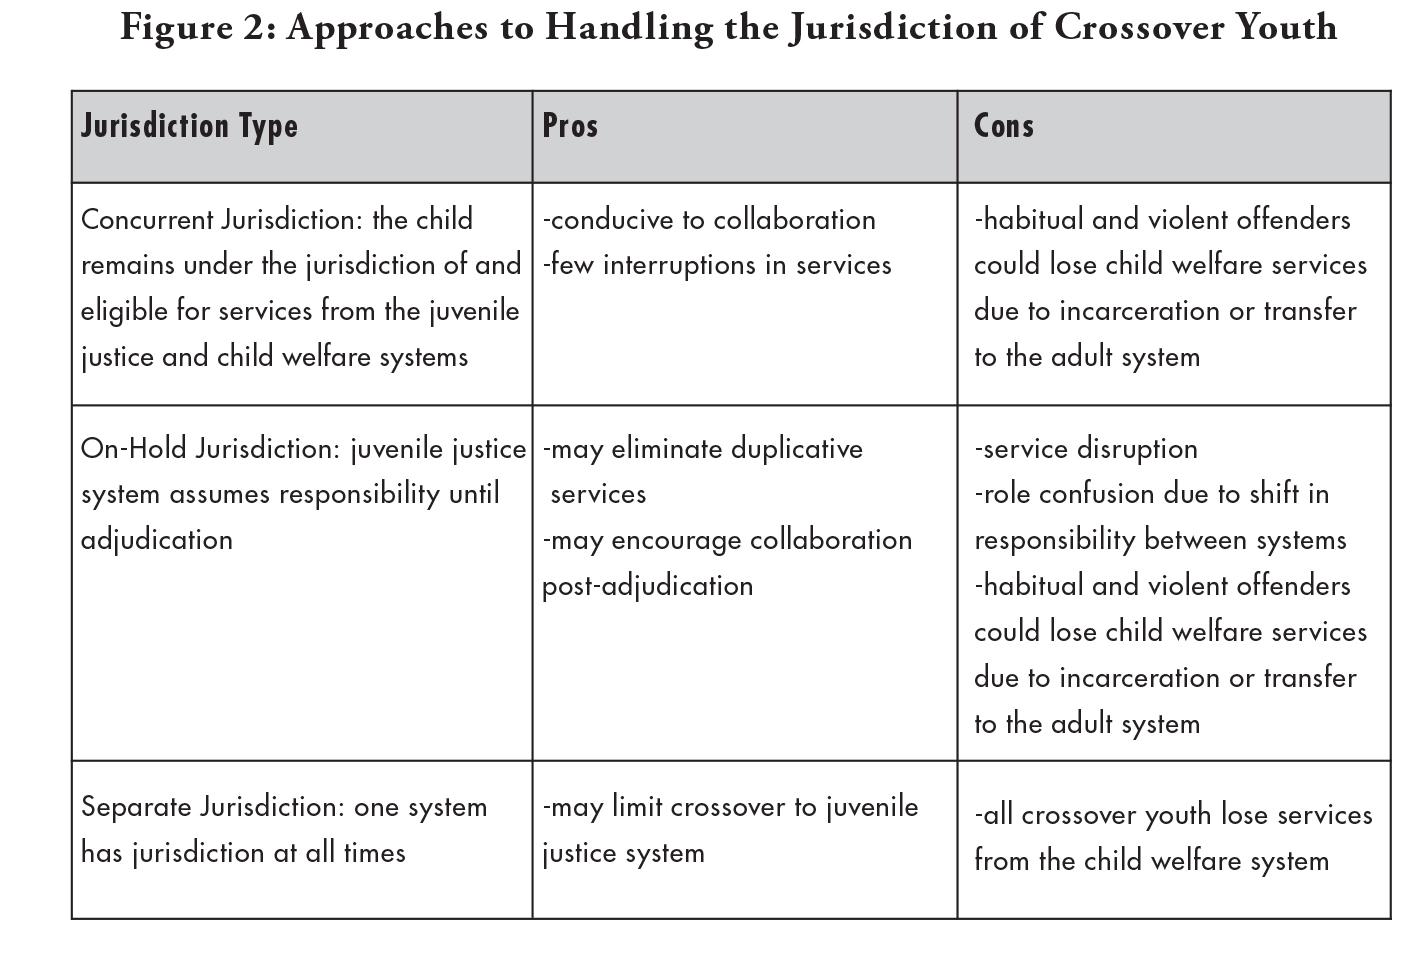 Figure 2: Approaches to Handling the Jurisdiciton of Crossover Youth